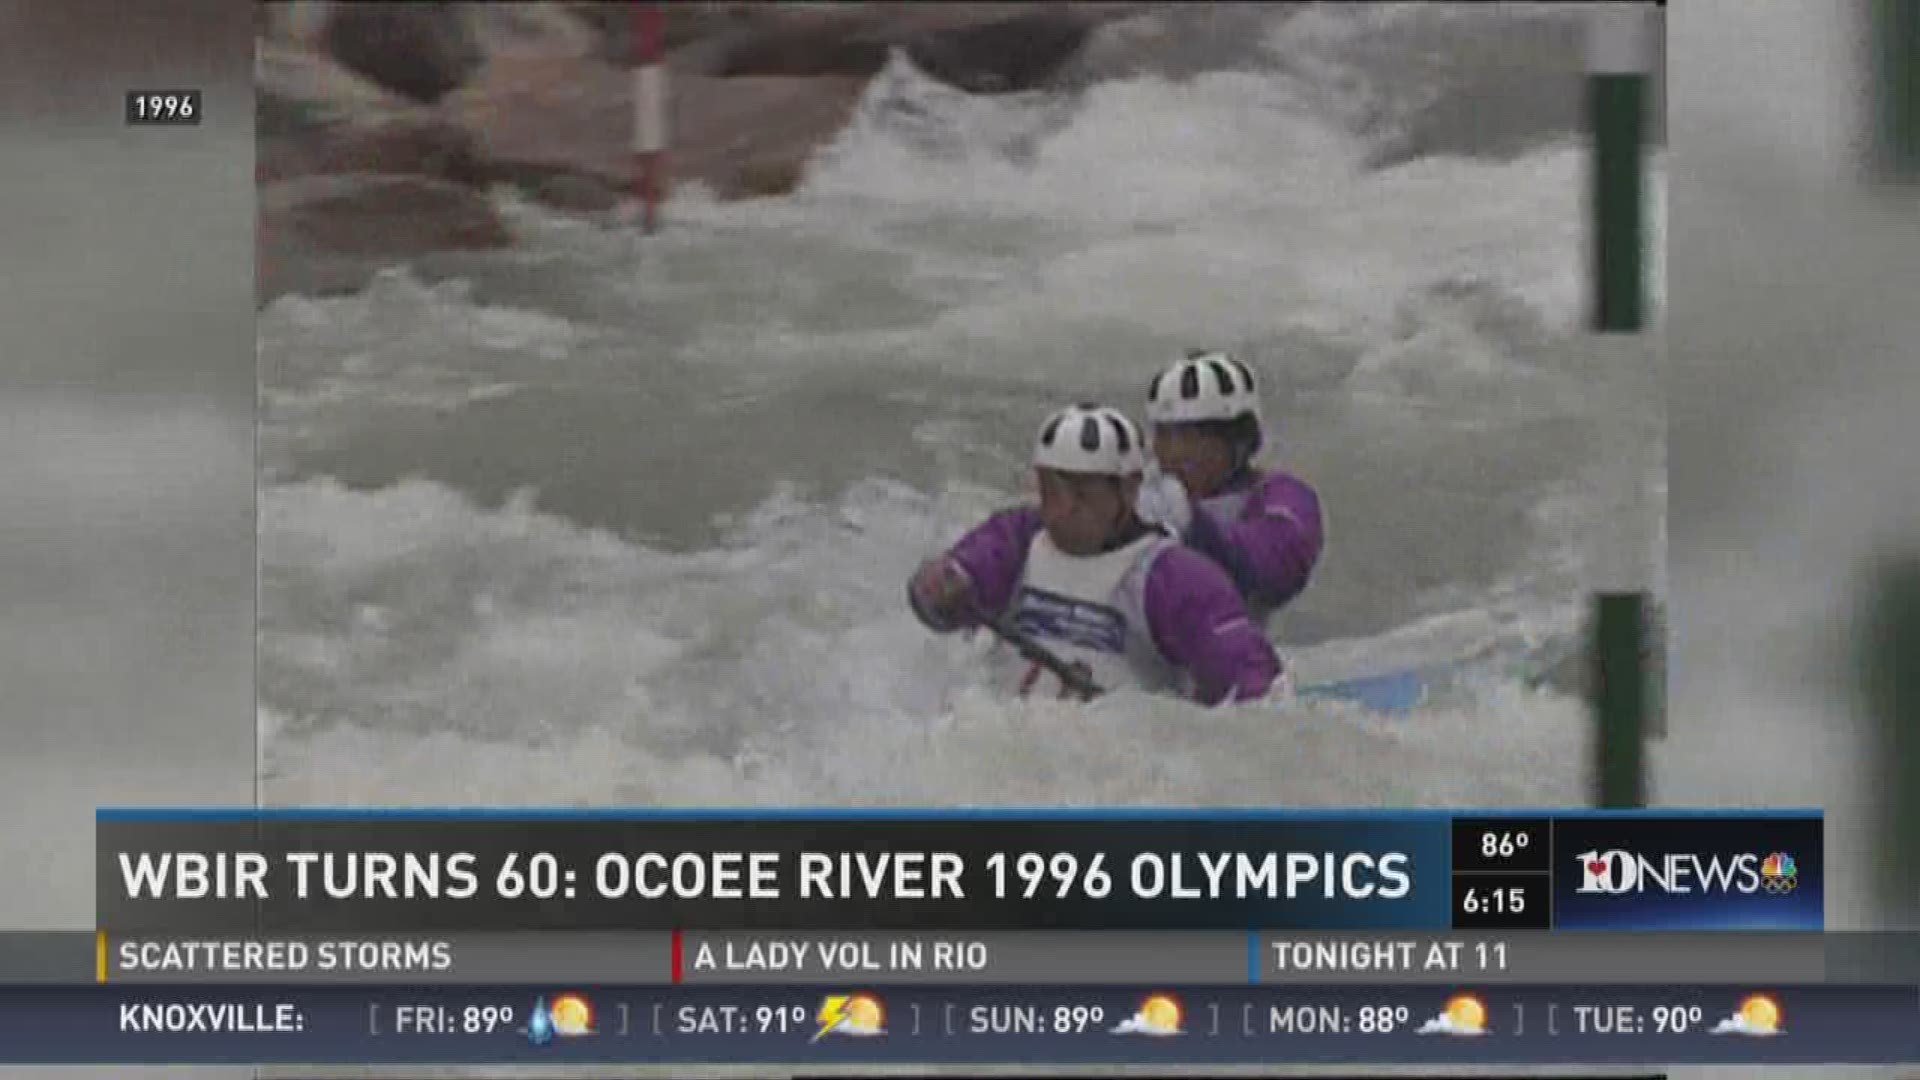 We continue our month-long countdown to the 60th anniversary of WBIR with a look at an Olympic event hosted in Tennessee.